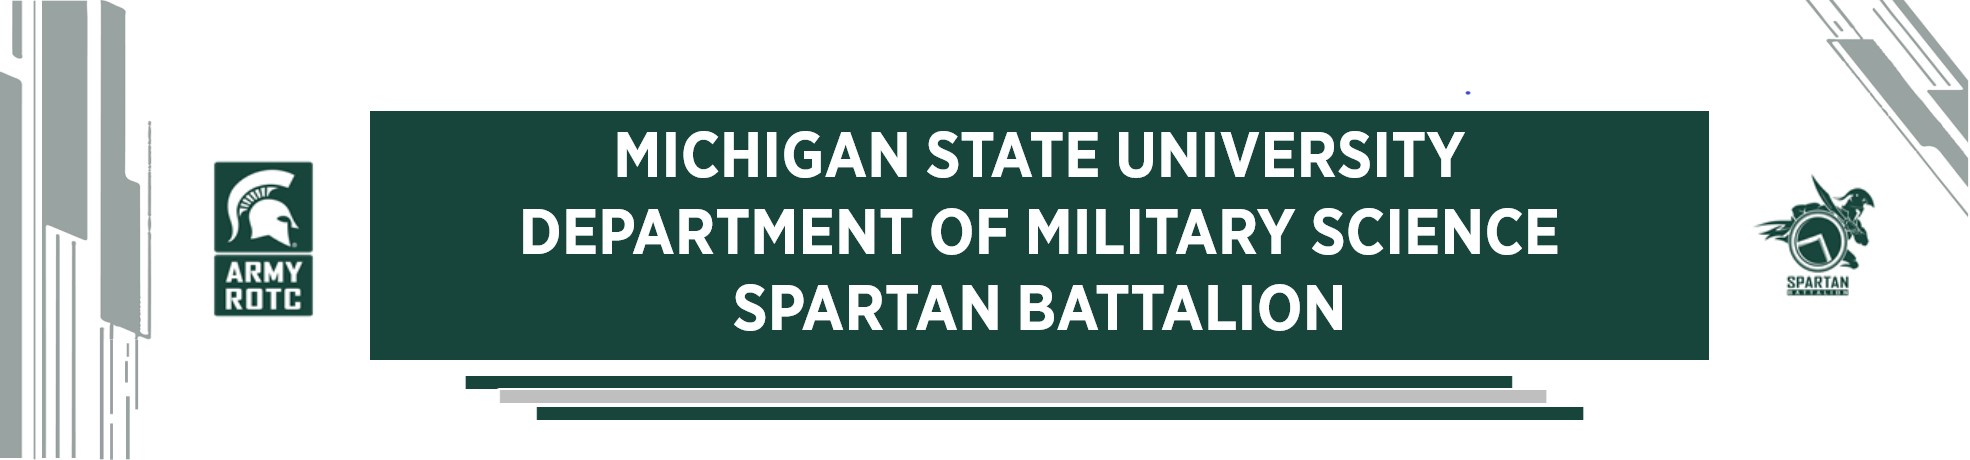 graphic text to shop MSU Department of Military Science Spartan Battalion